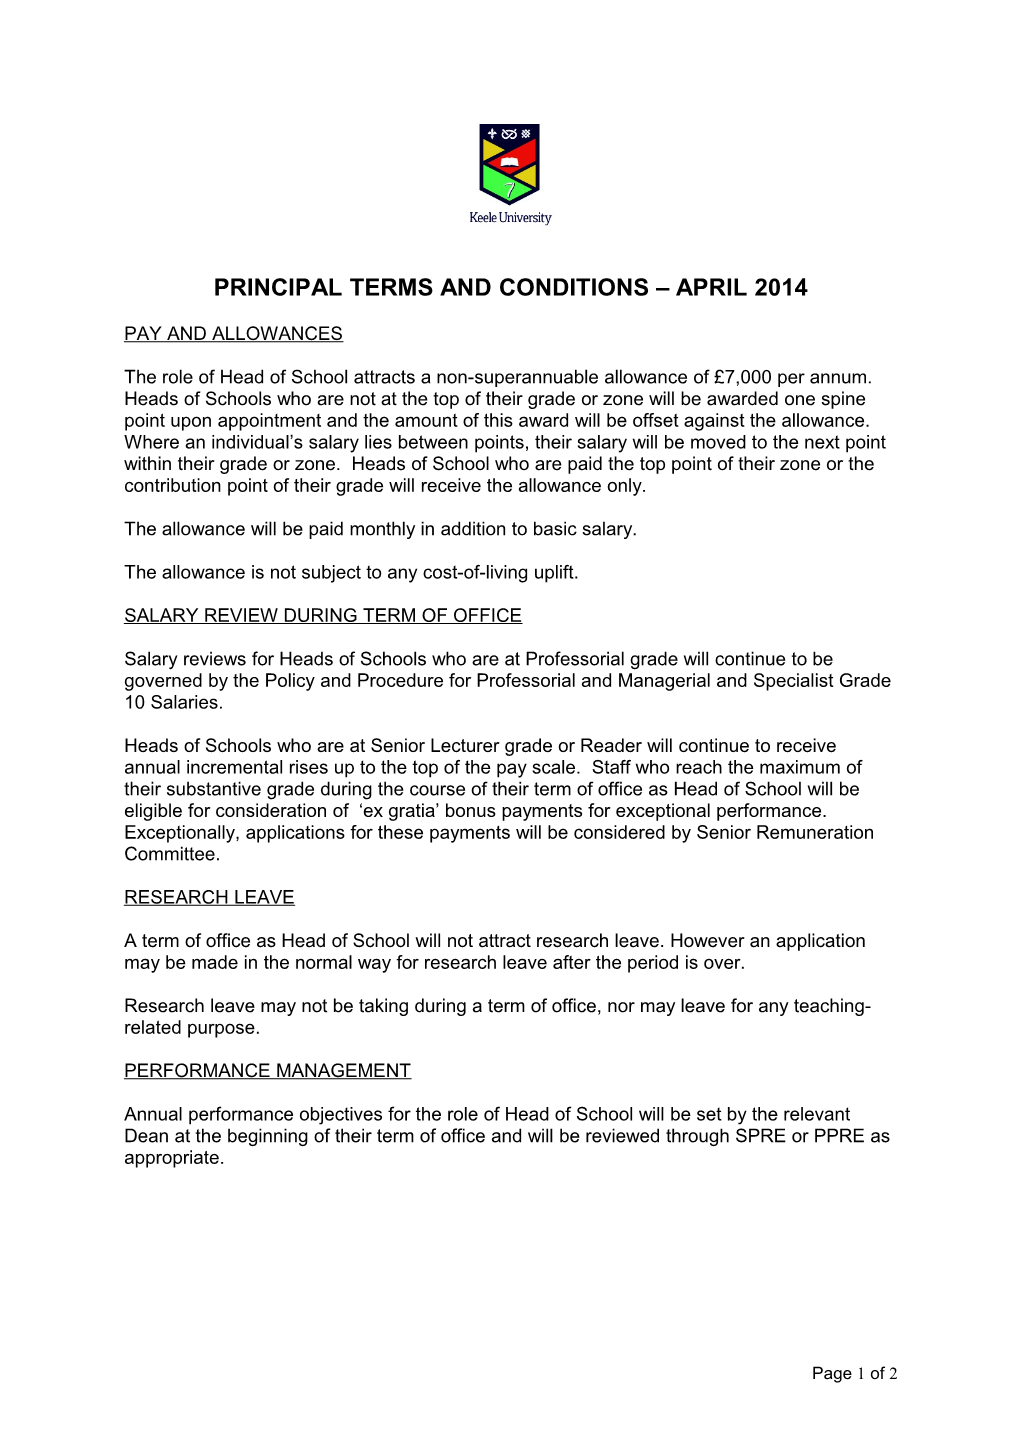 Principal Terms and Conditions April 2014